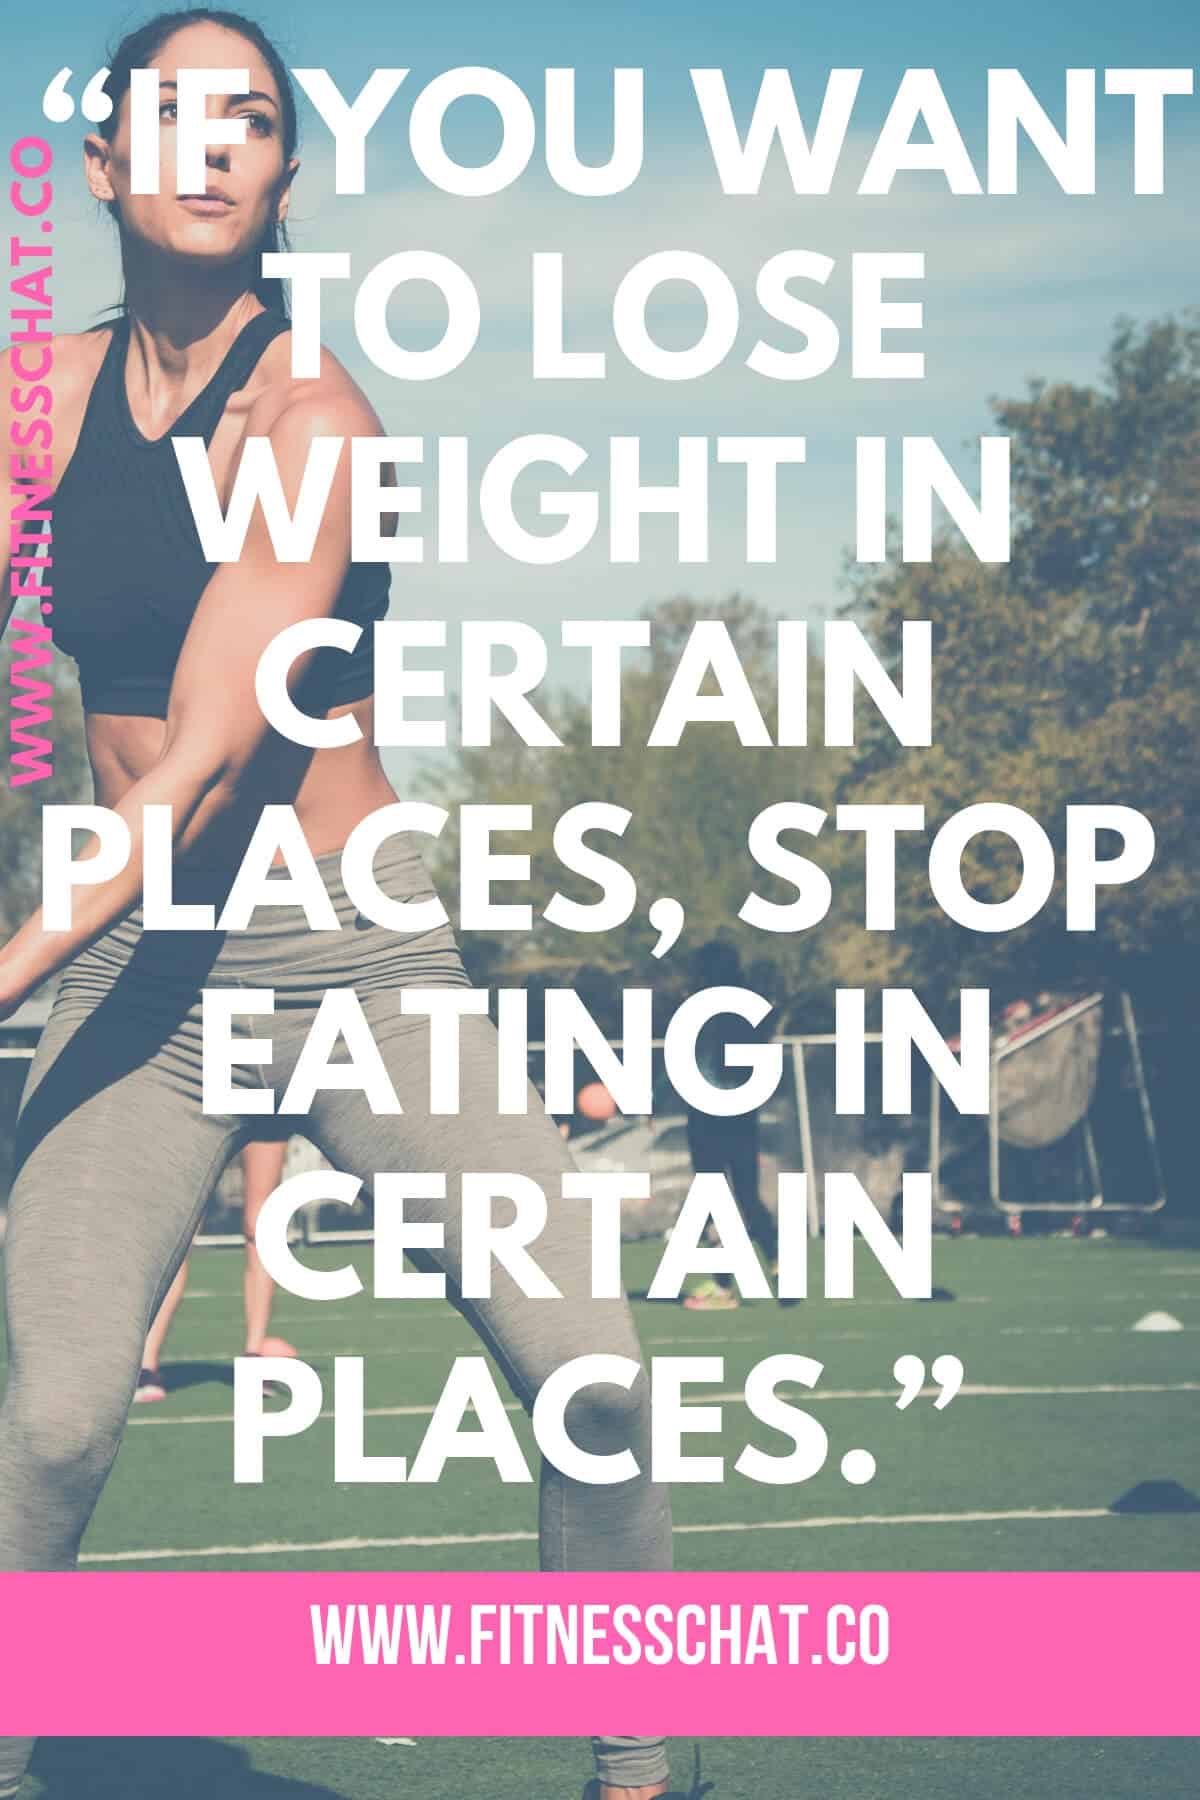 “If you want to lose weight in certain places, stop eating in certain places.” 